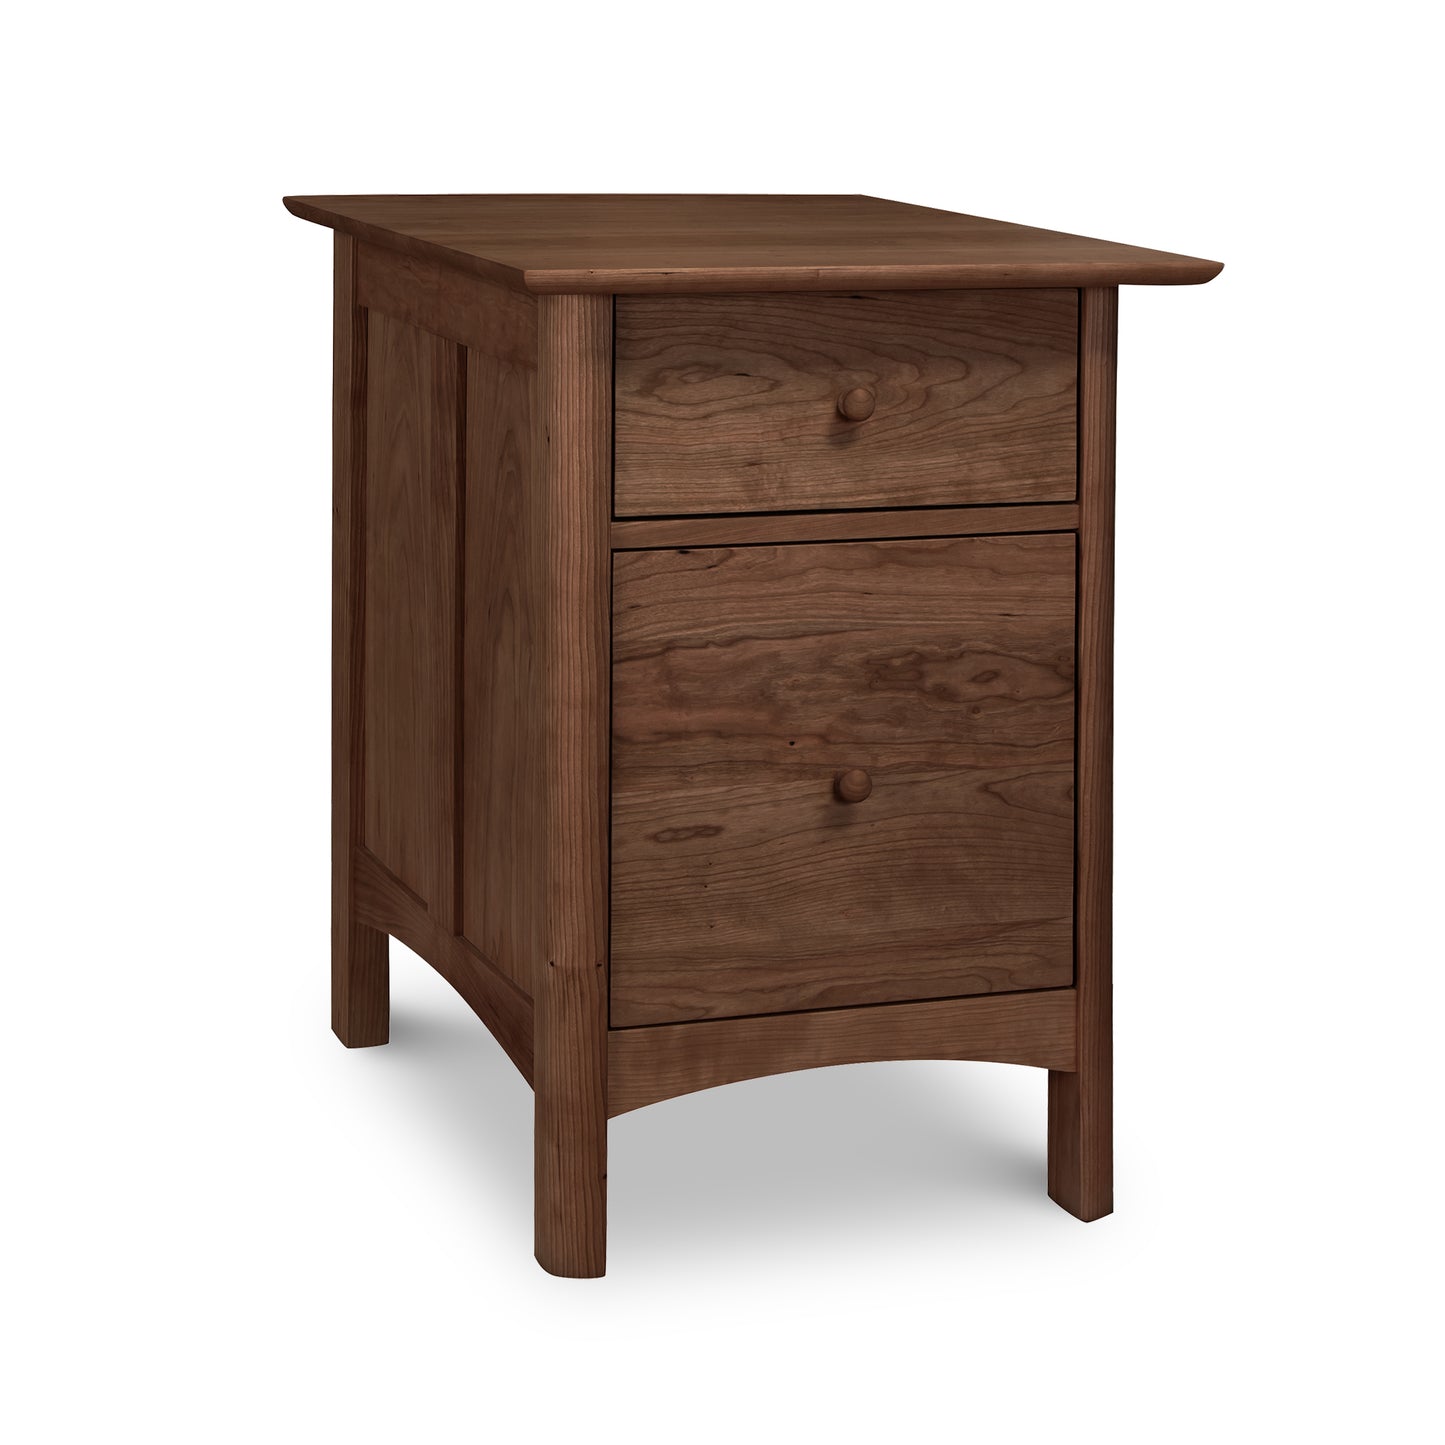 A Heartwood Shaker Vertical File Cabinet made of wood, featuring twin drawers by Vermont Furniture Designs.